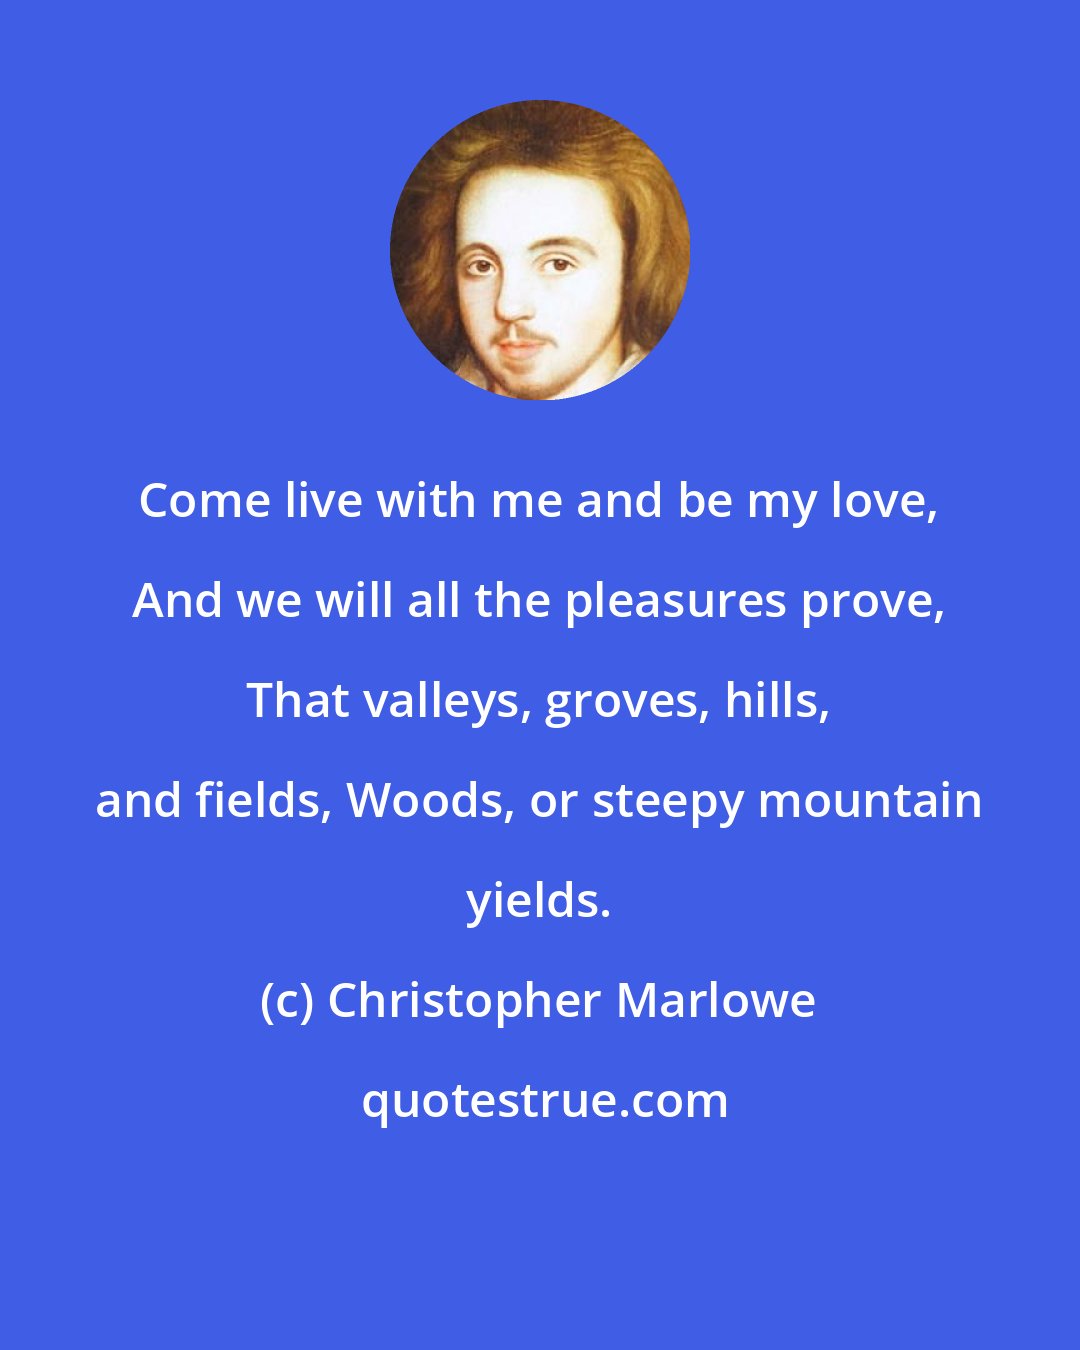 Christopher Marlowe: Come live with me and be my love, And we will all the pleasures prove, That valleys, groves, hills, and fields, Woods, or steepy mountain yields.